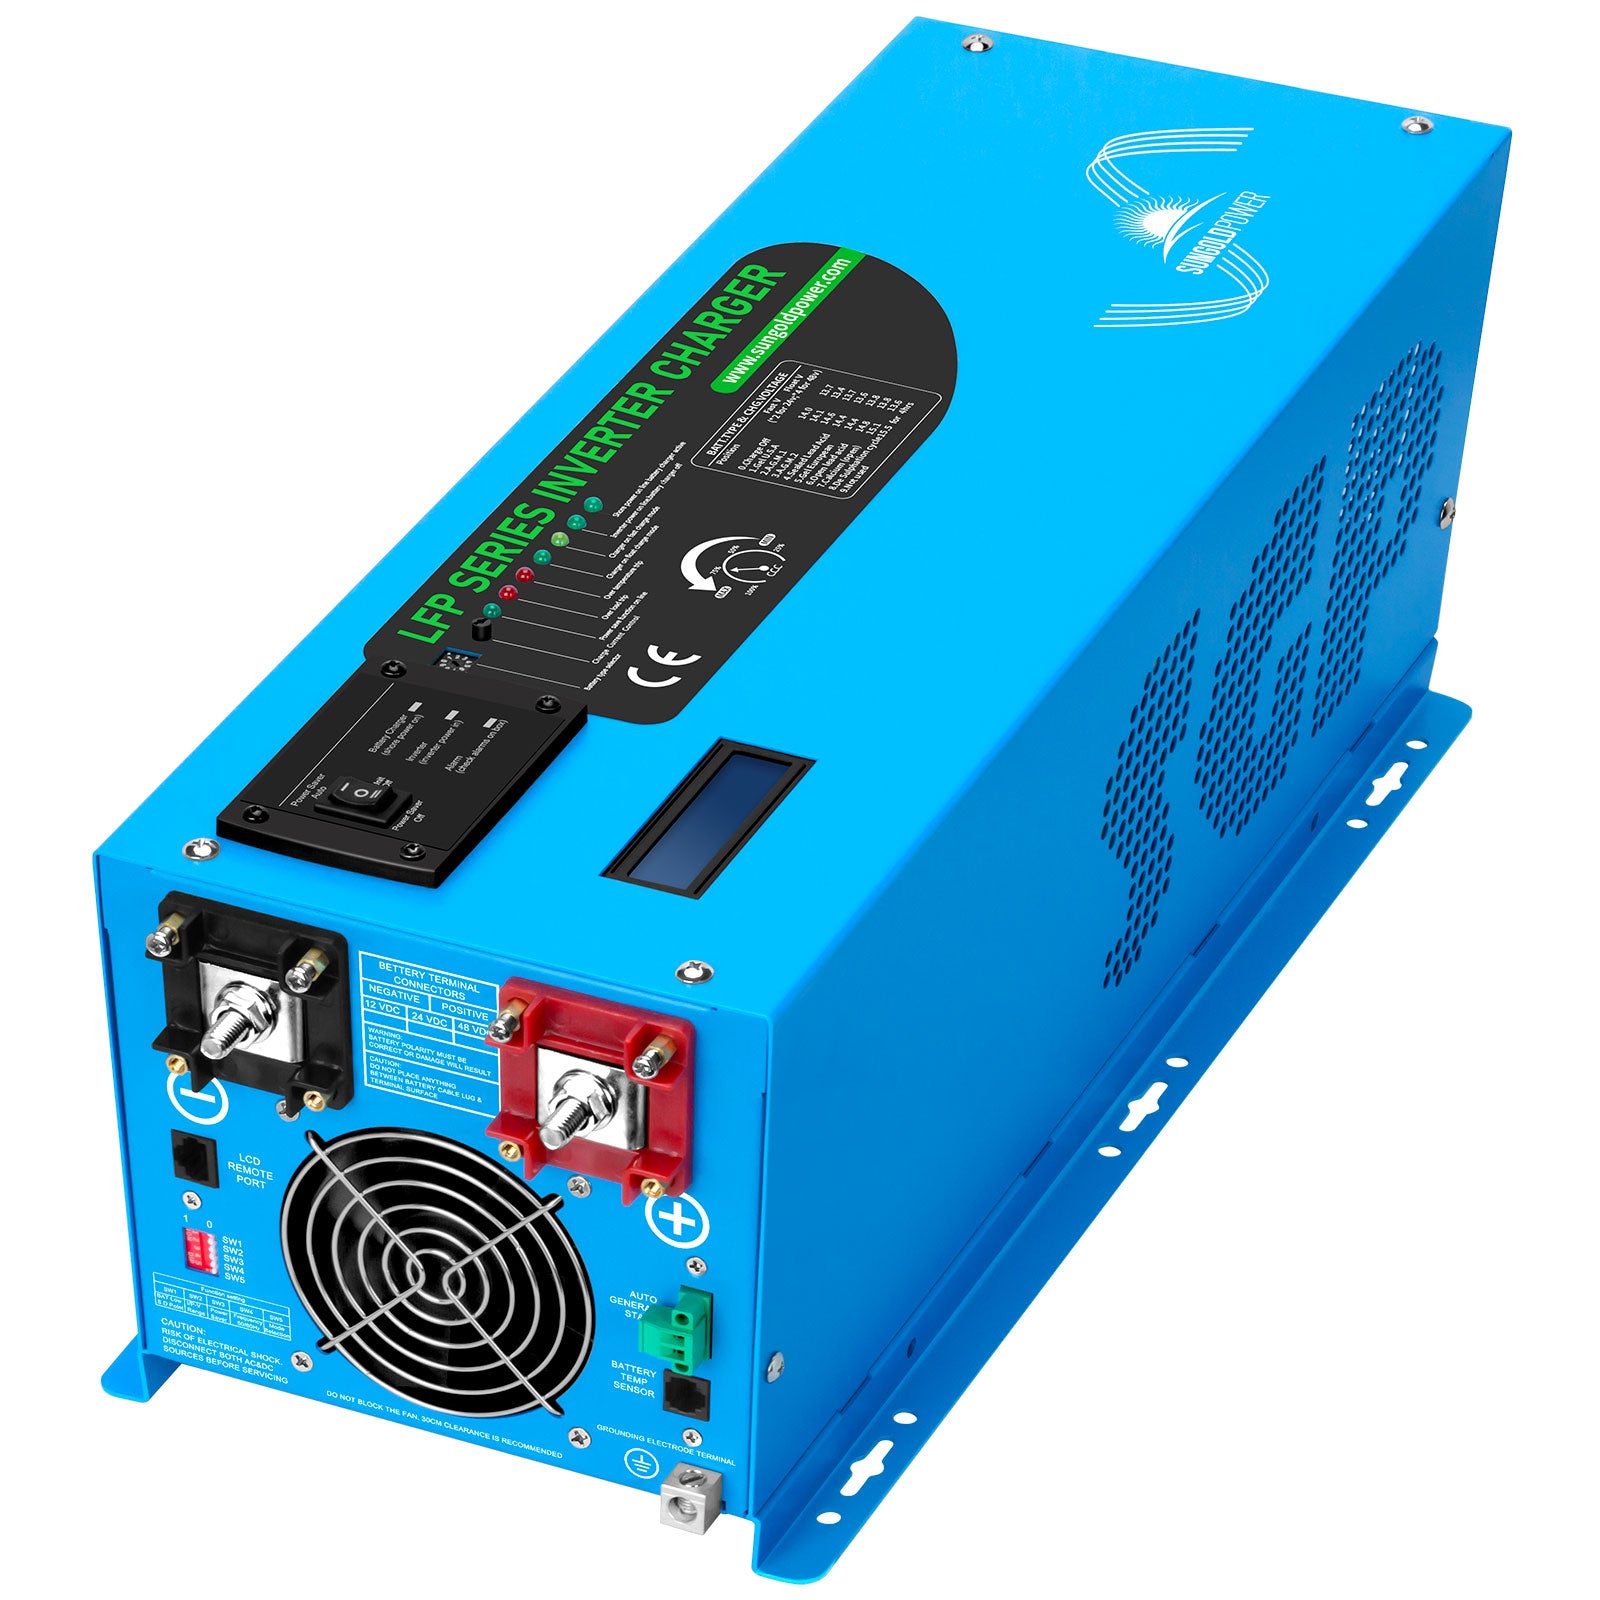 3000W DC 12V Pure Sine Wave Inverter With Charger